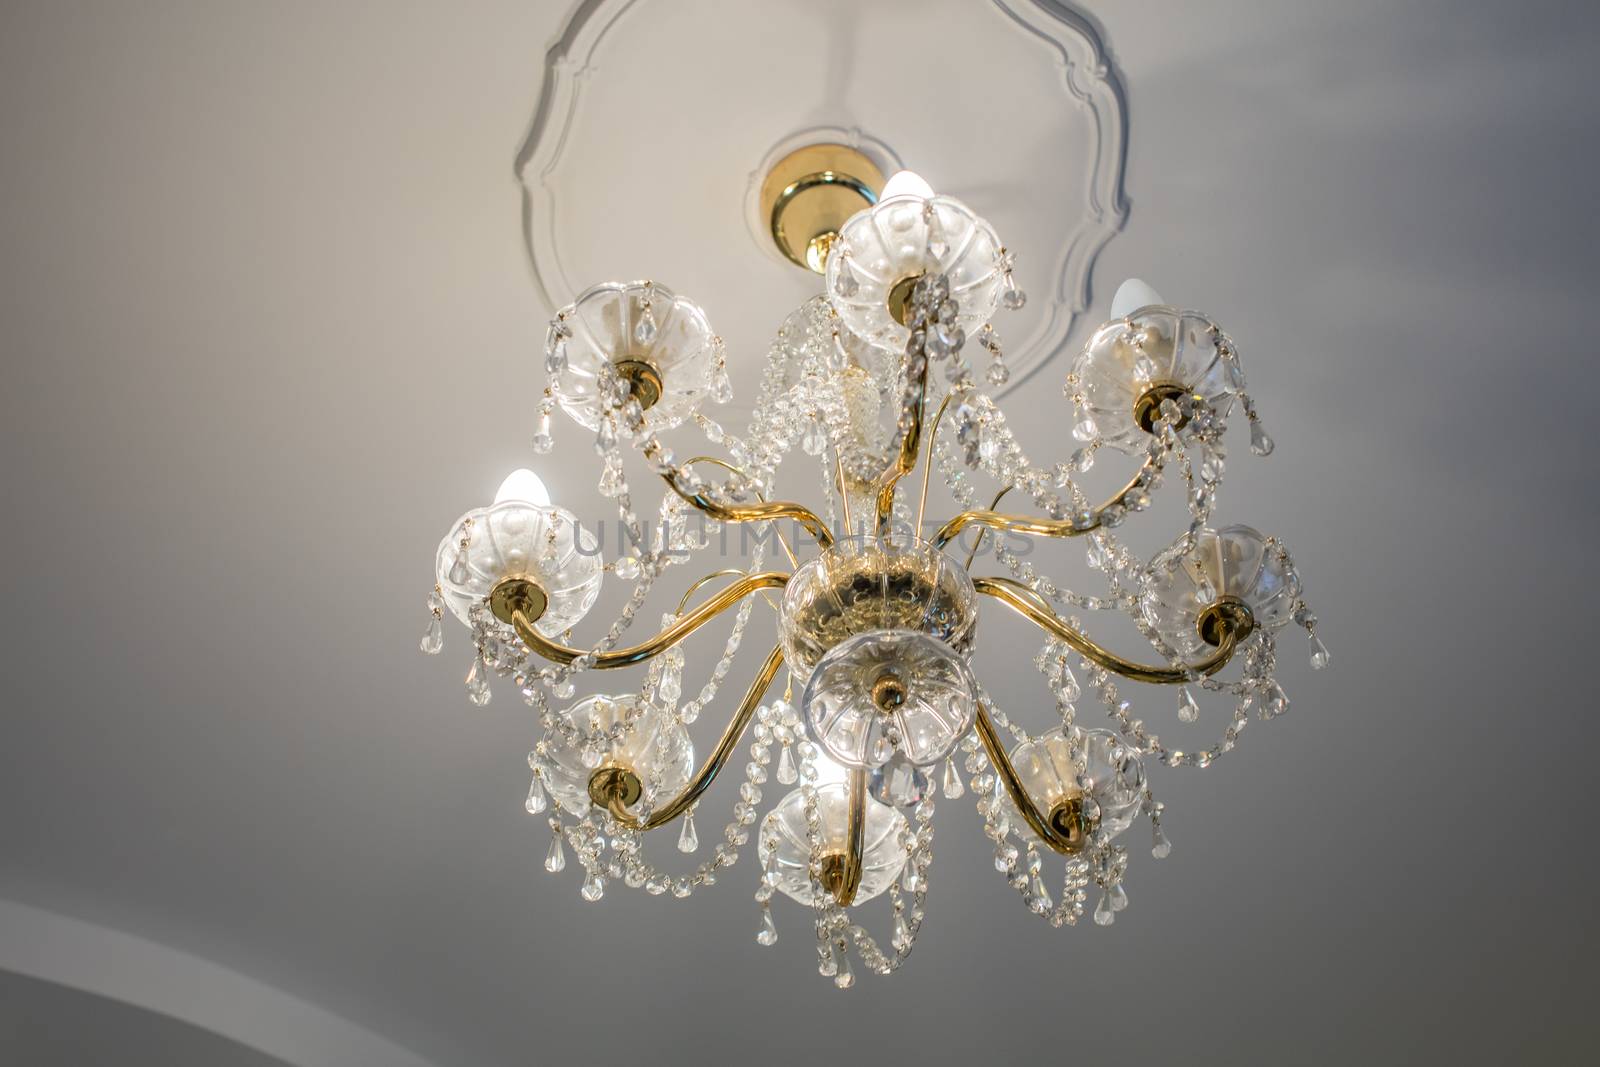 Huge chandelier closeup with electric bulbs on fancy ceiling